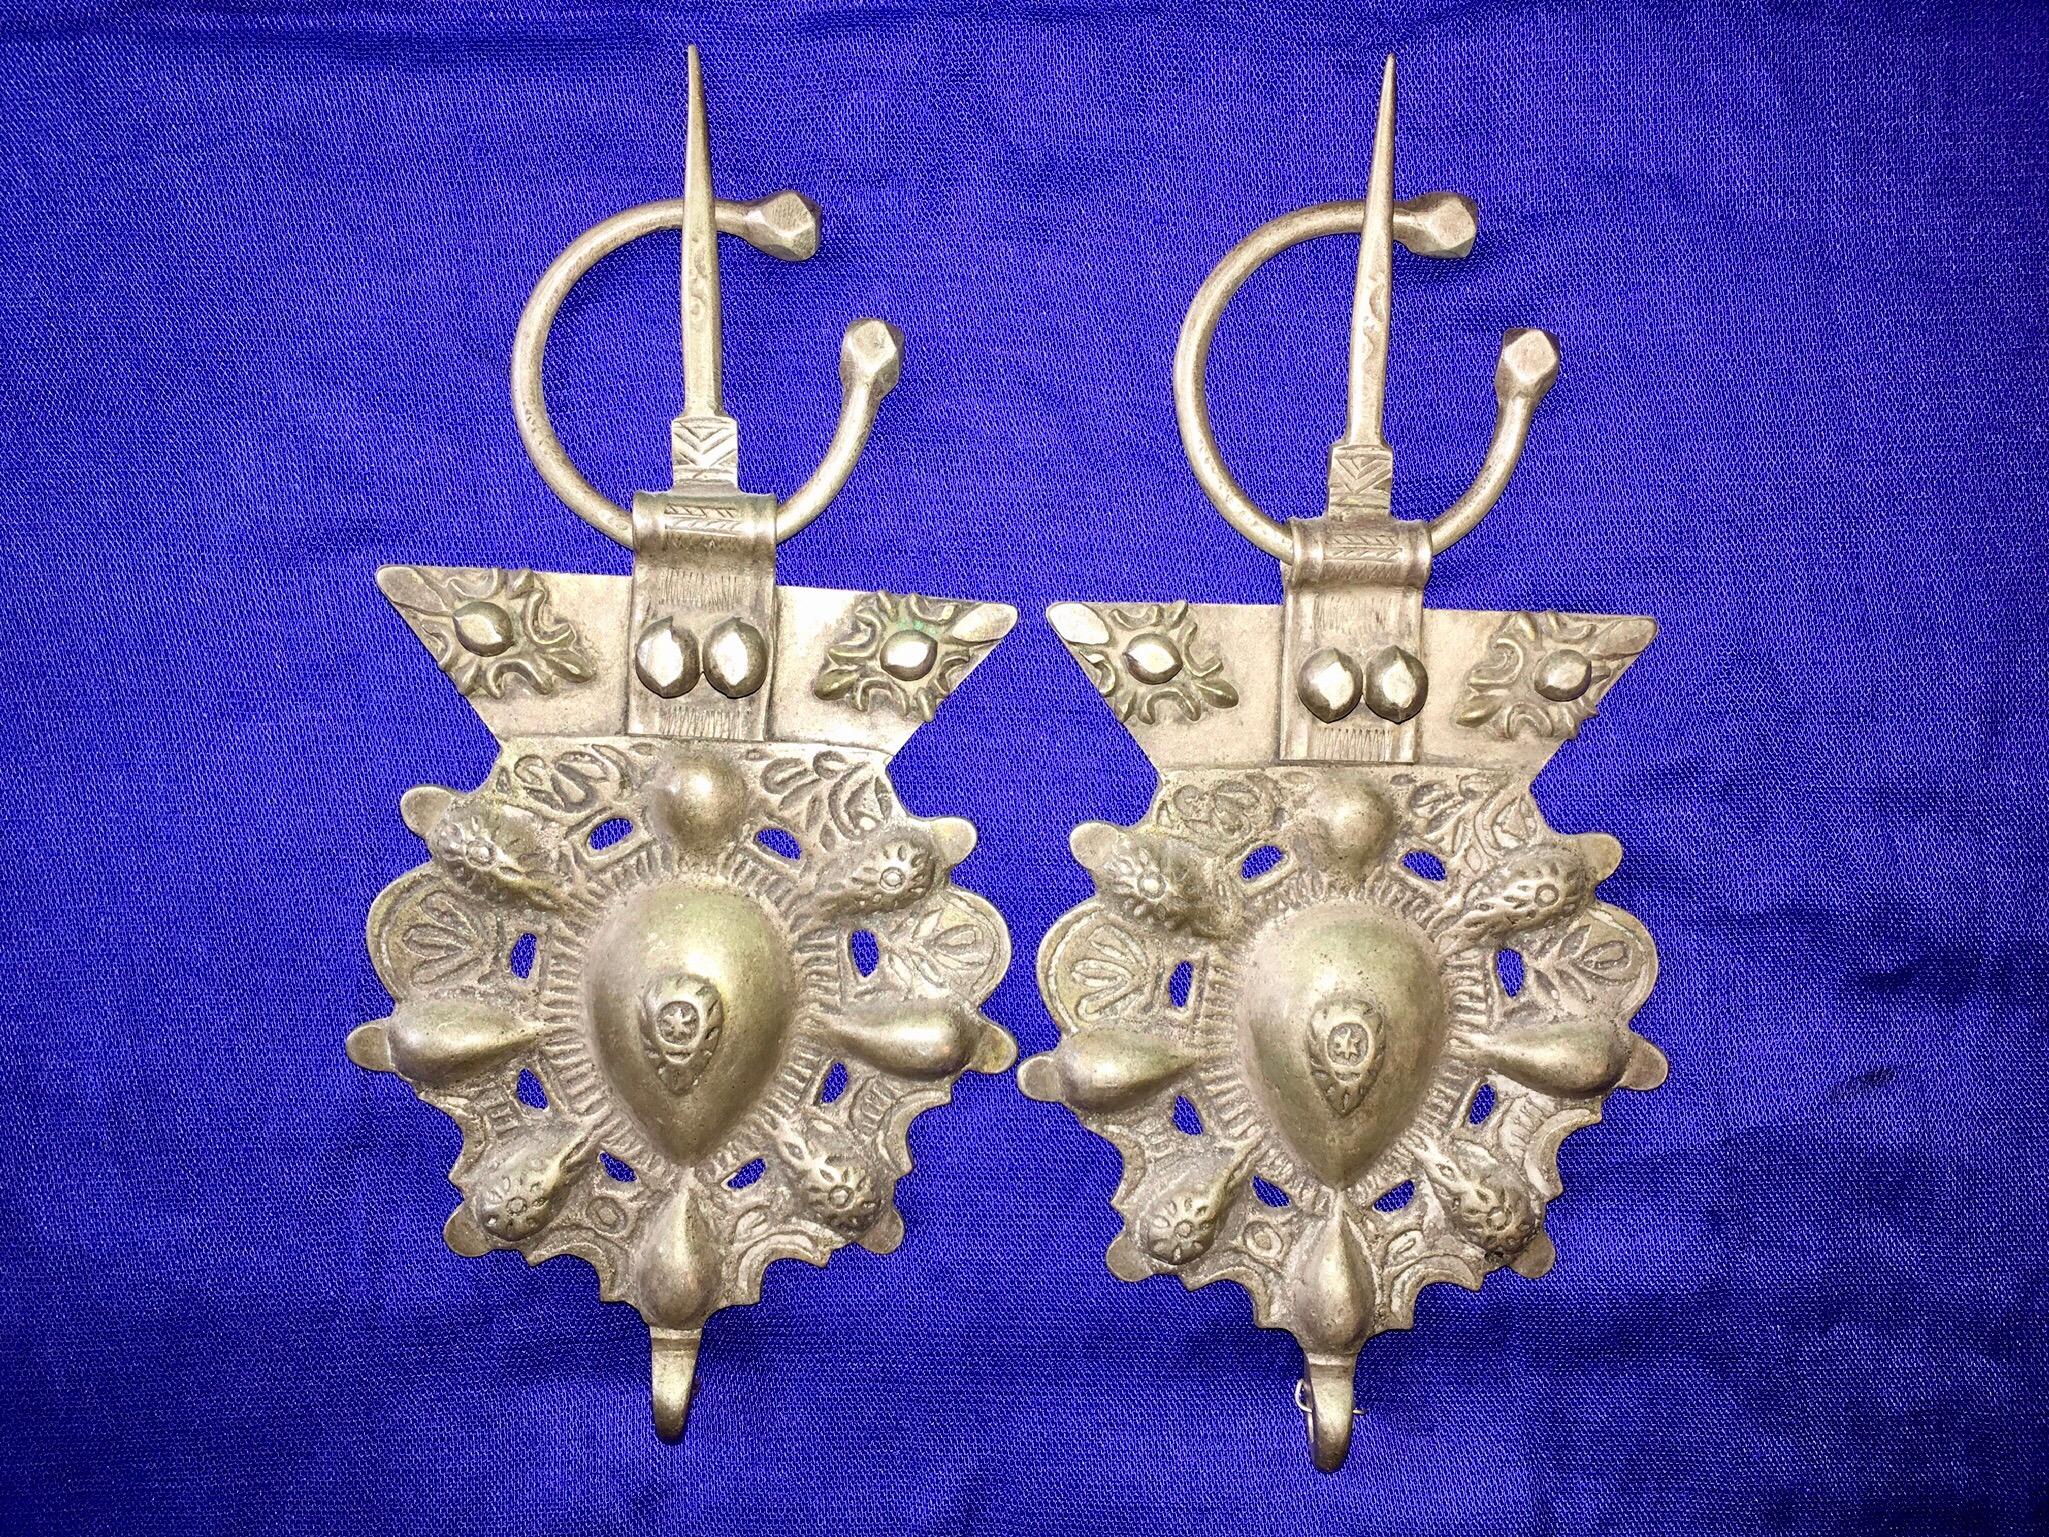 Pair of handmade antique solid silver brooches from the 16th century. They feature both repousse and chasing, as well as intricate engraving. Impeccably preserved, they are in excellent condition. Tested as pure silver.

These brooches were